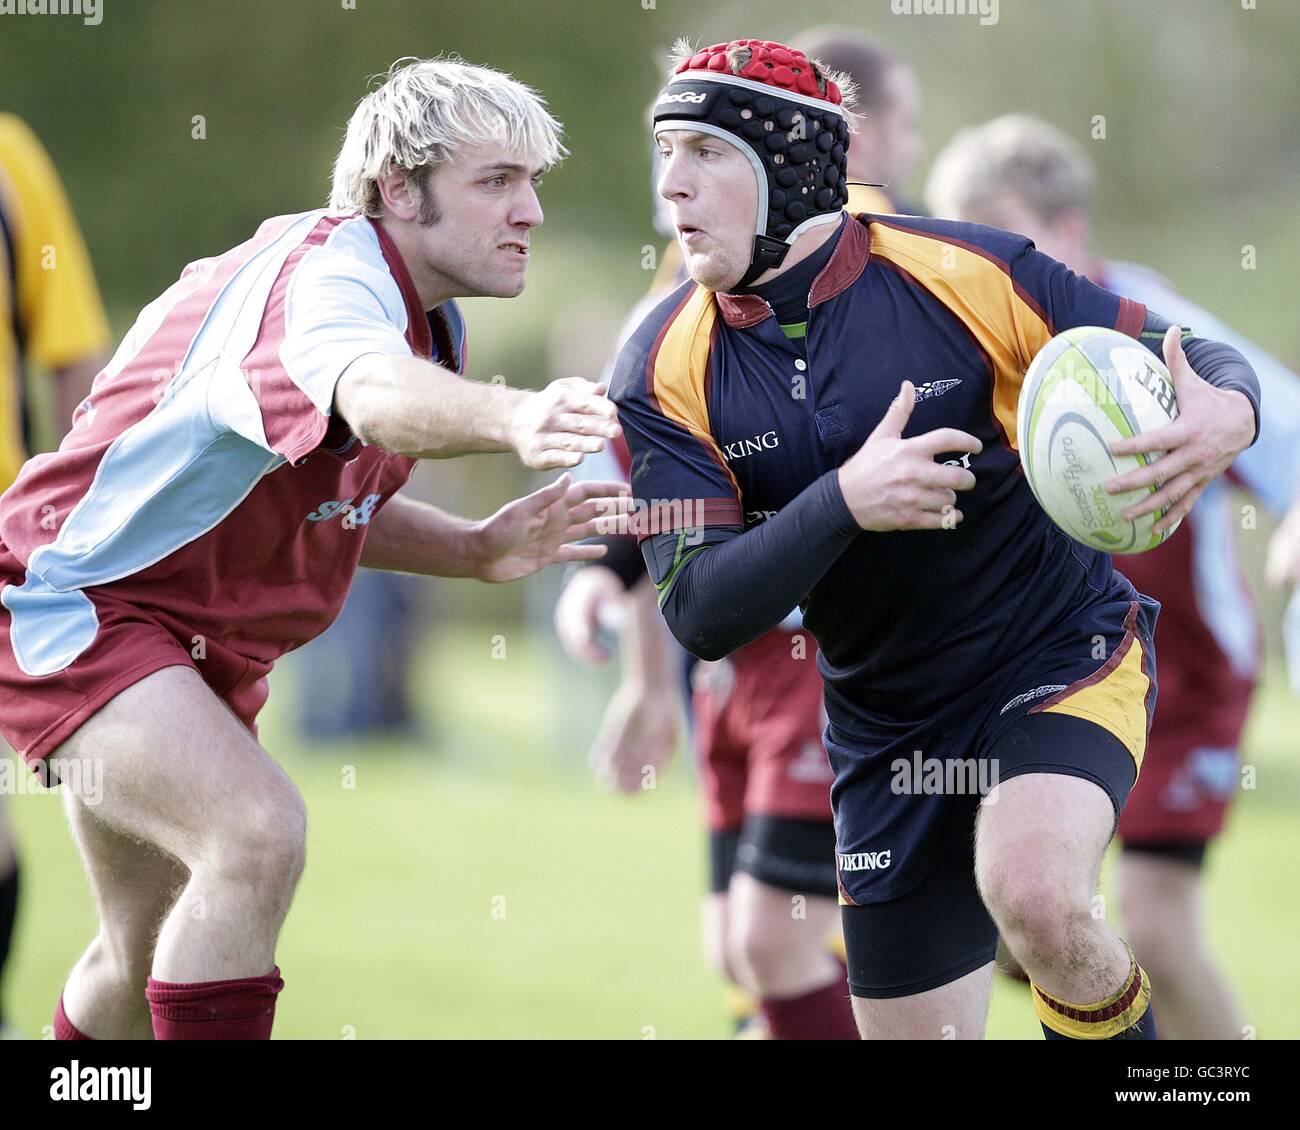 Rugby Union - Scottish Hydro East - St Boswells / Queensferry - St Boswells. Andrew Donaldson di St Boswells (a sinistra) affronta Allan Carson Jr del Queensferry nella partita scozzese Hydro East 2 a St Boswells, Melrose. Foto Stock